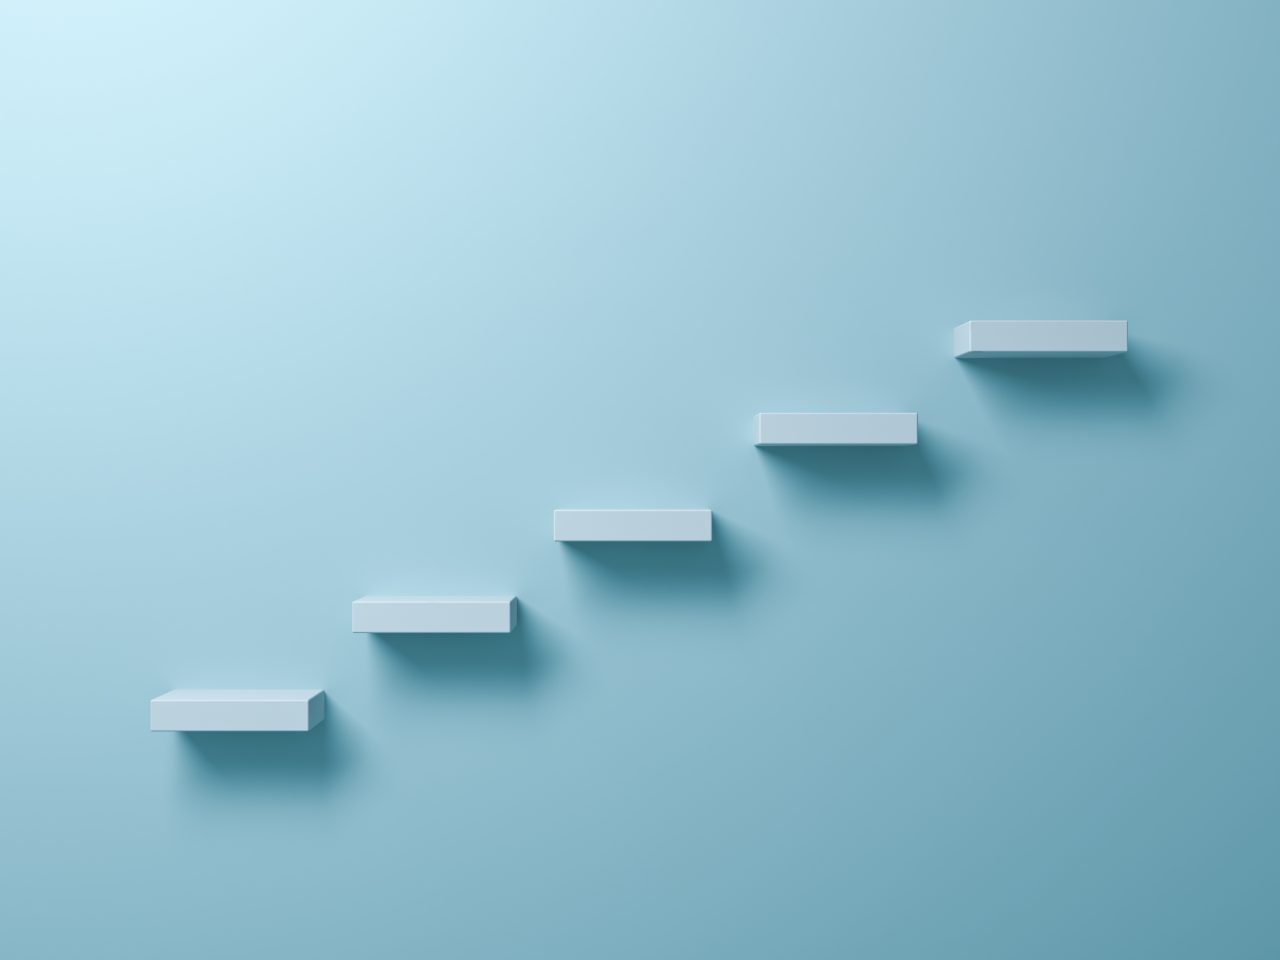 Abstract stairs or steps concept on light blue background